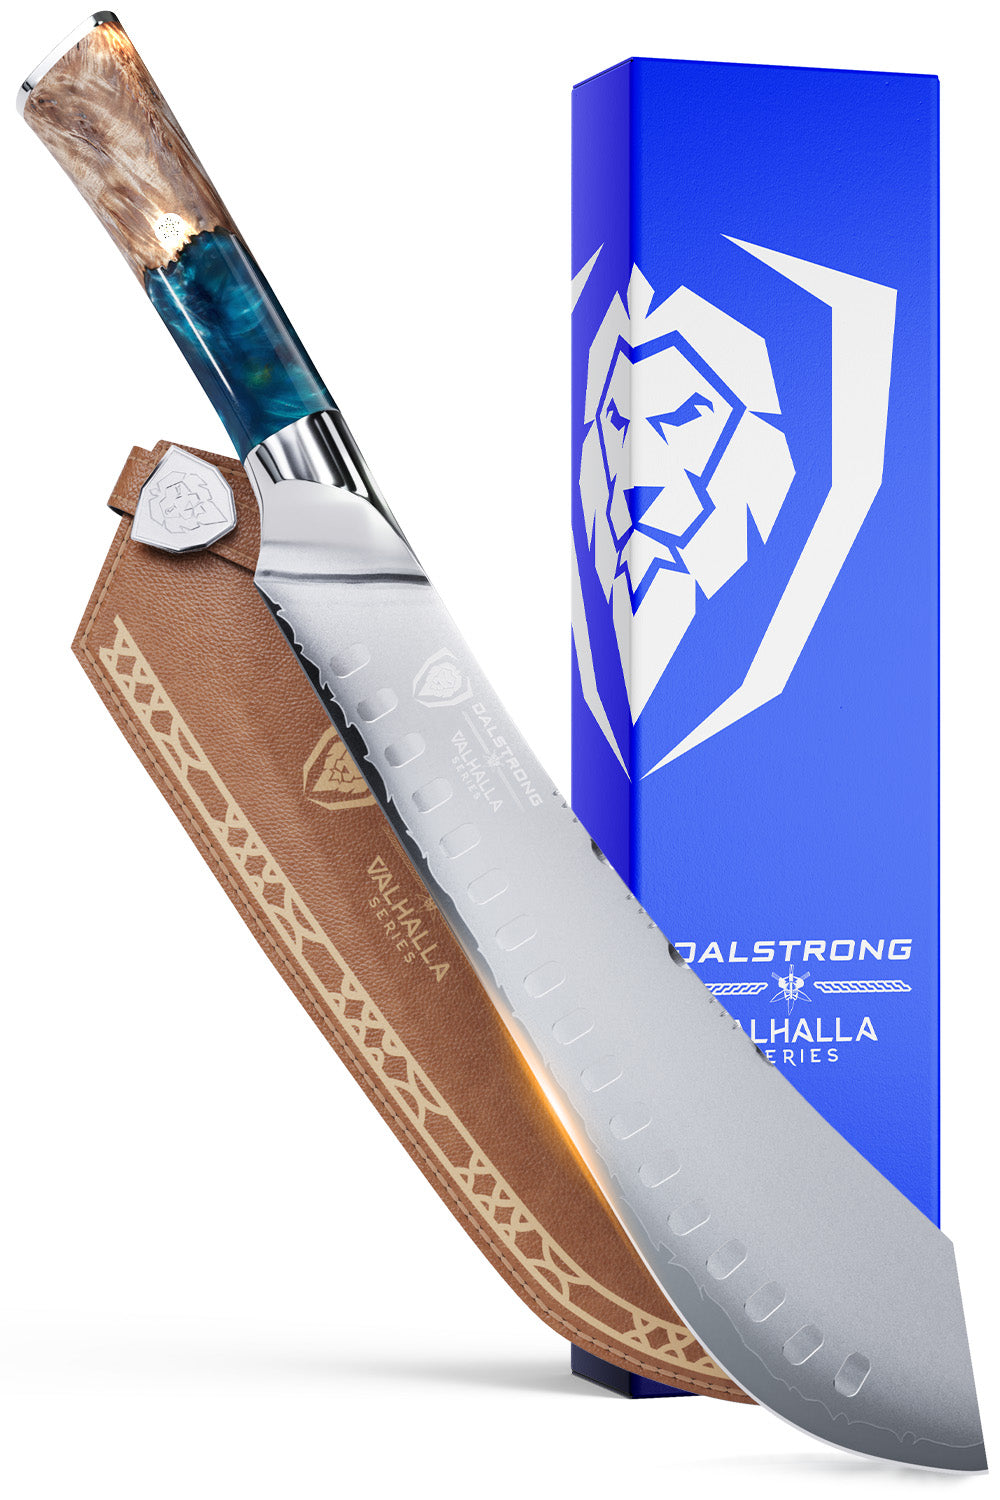 Bull-Nose Butcher Knife 10" | Valhalla Series | Dalstrong ©